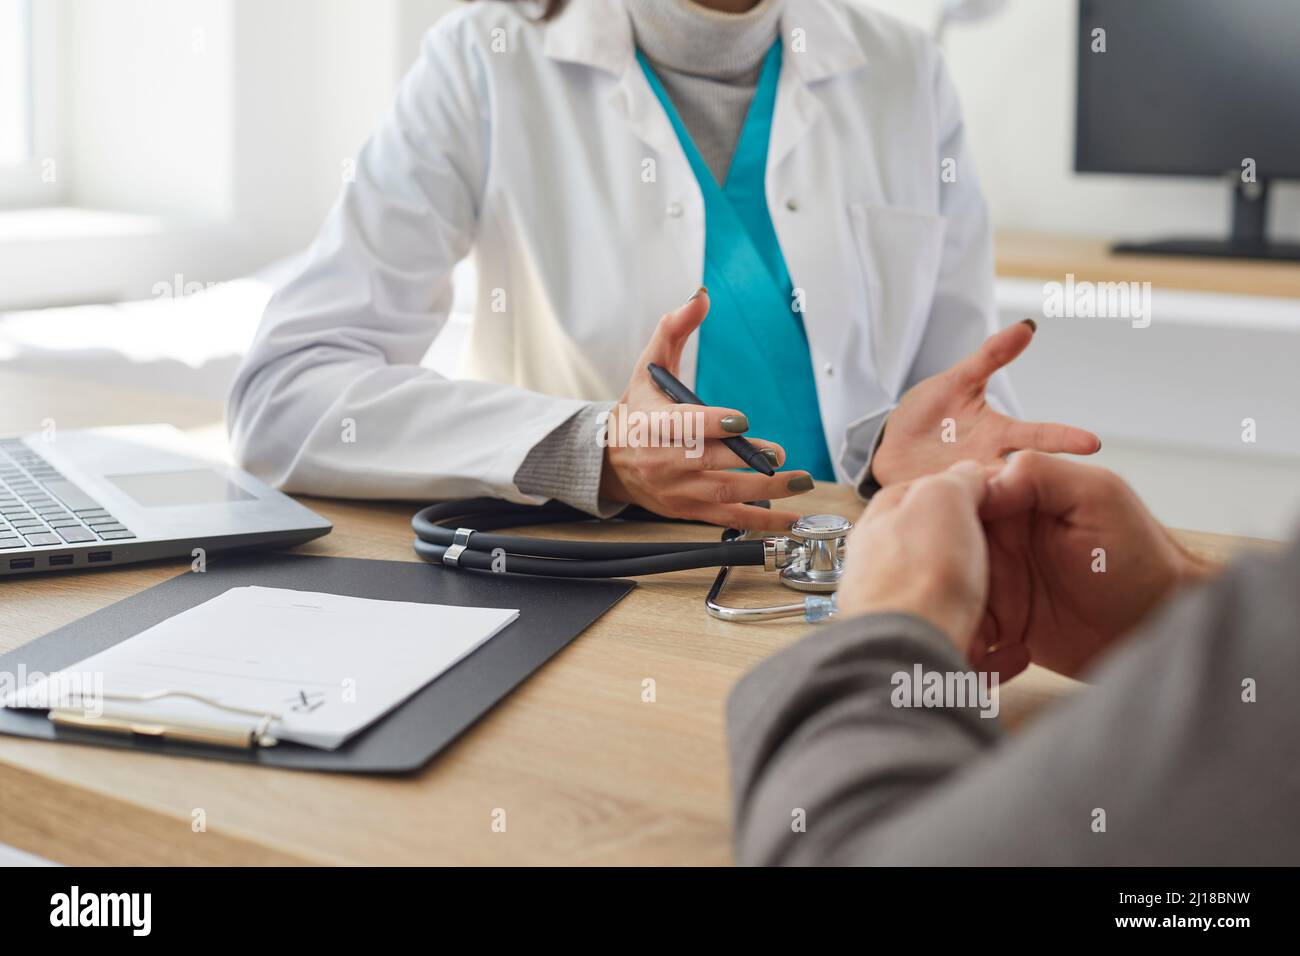 Hands of unknown doctor and patient who talk and discuss diagnosis during medical appointment. Stock Photo